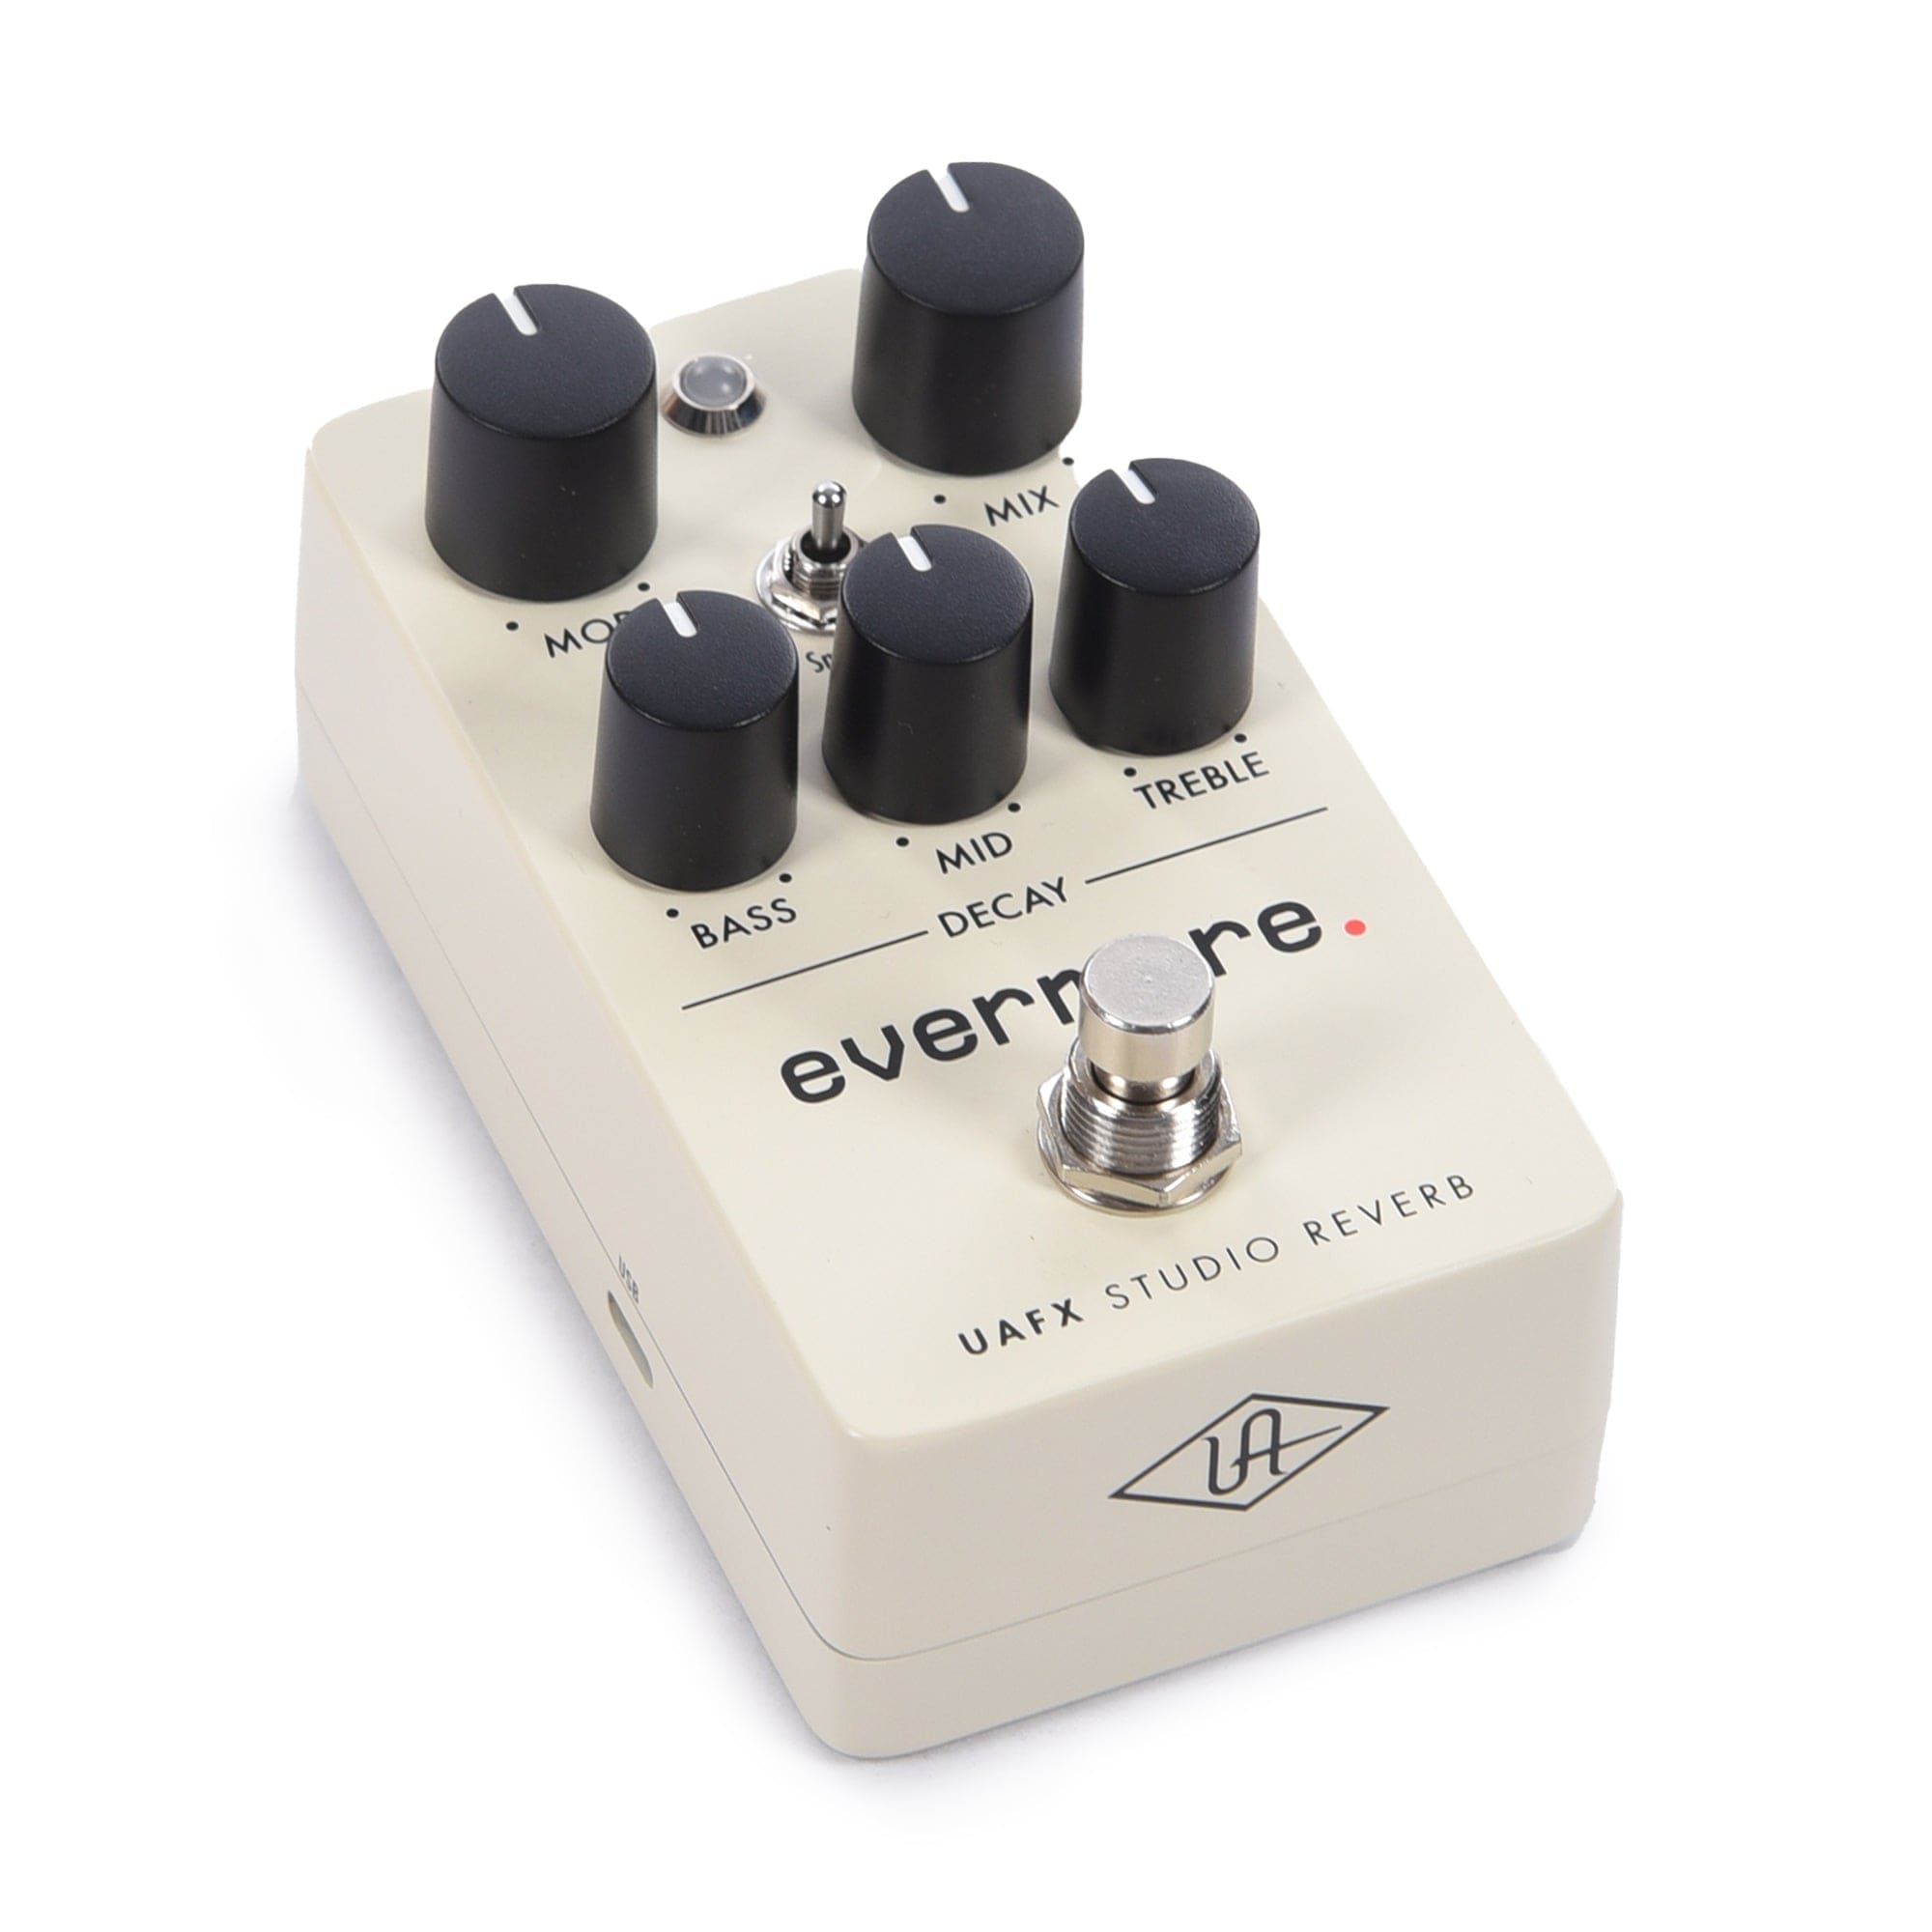 Universal Audio Evermore Reverb Pedal Effects and Pedals / Reverb